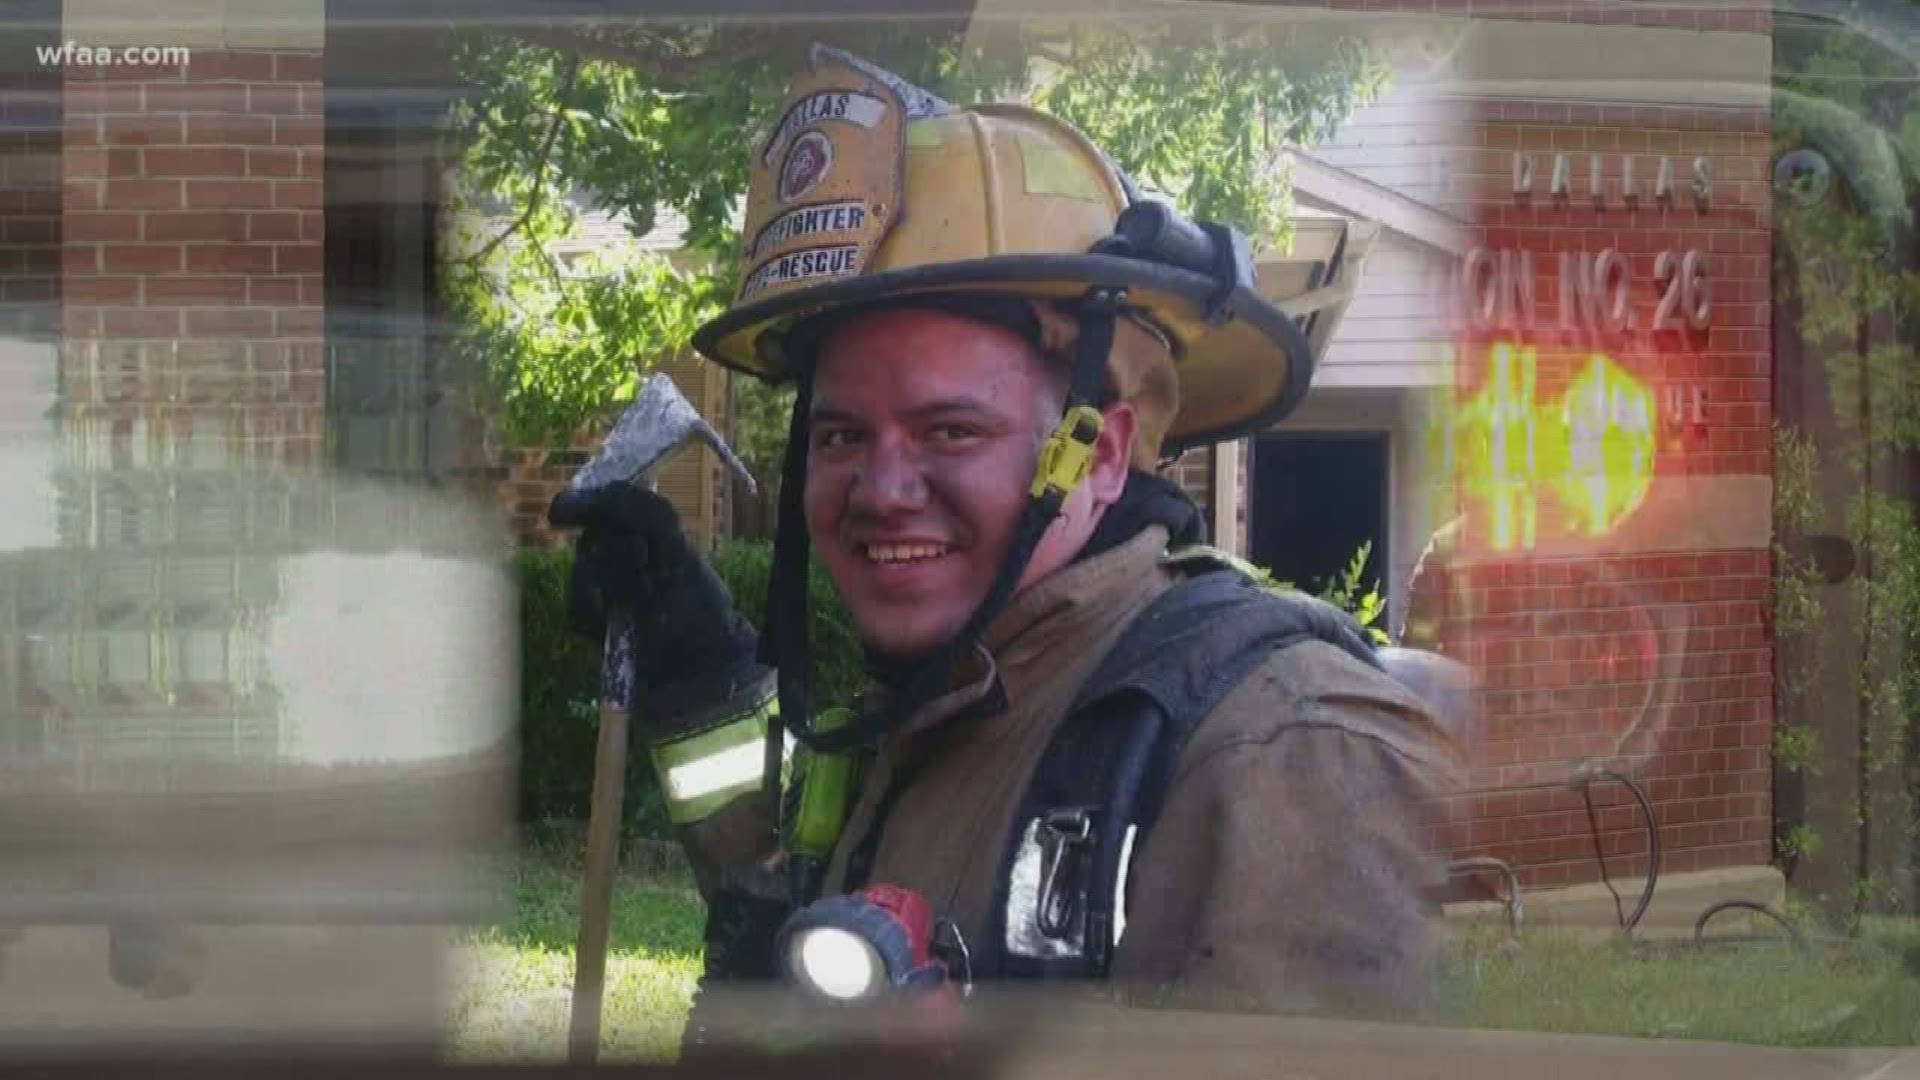 Israel Espinoza, a Dallas firefighter, was diagnosed Tuesday with coronavirus. He spiked a fever and had body aches. He said he's tired, and ready to fully recover.